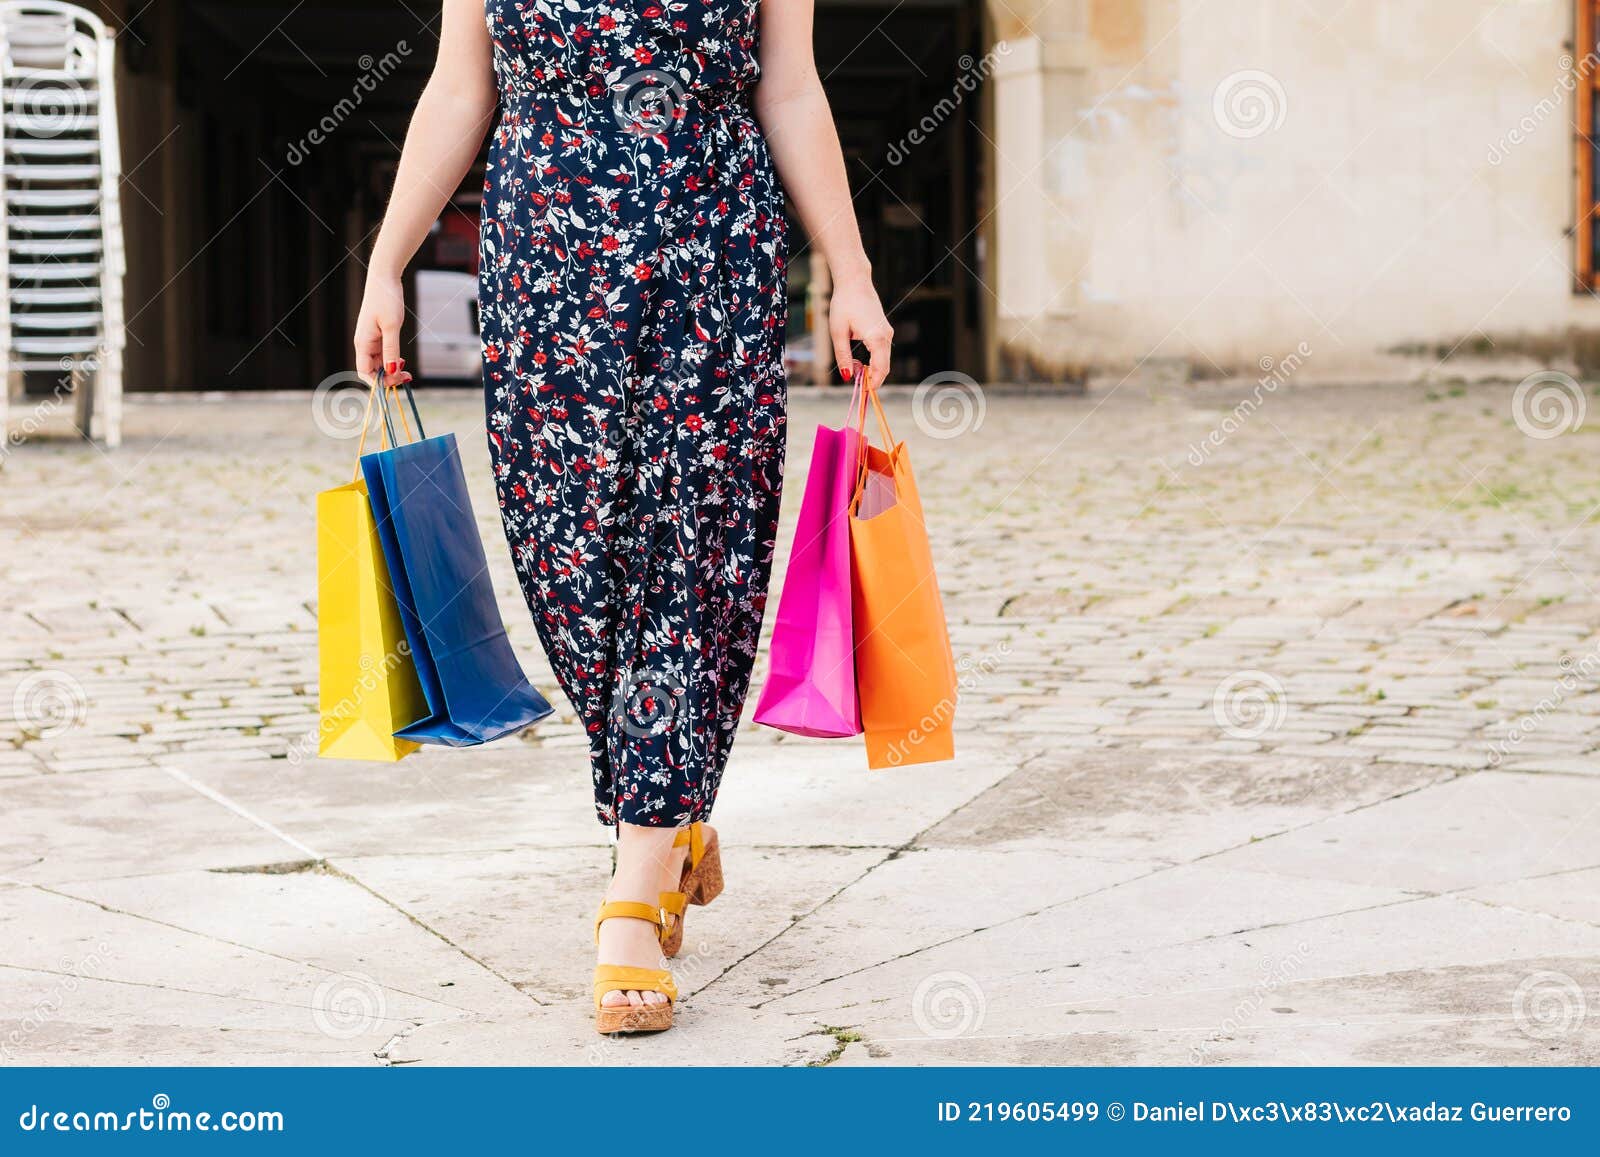 impersonal photo of a shopping woman with colored bags in her hands